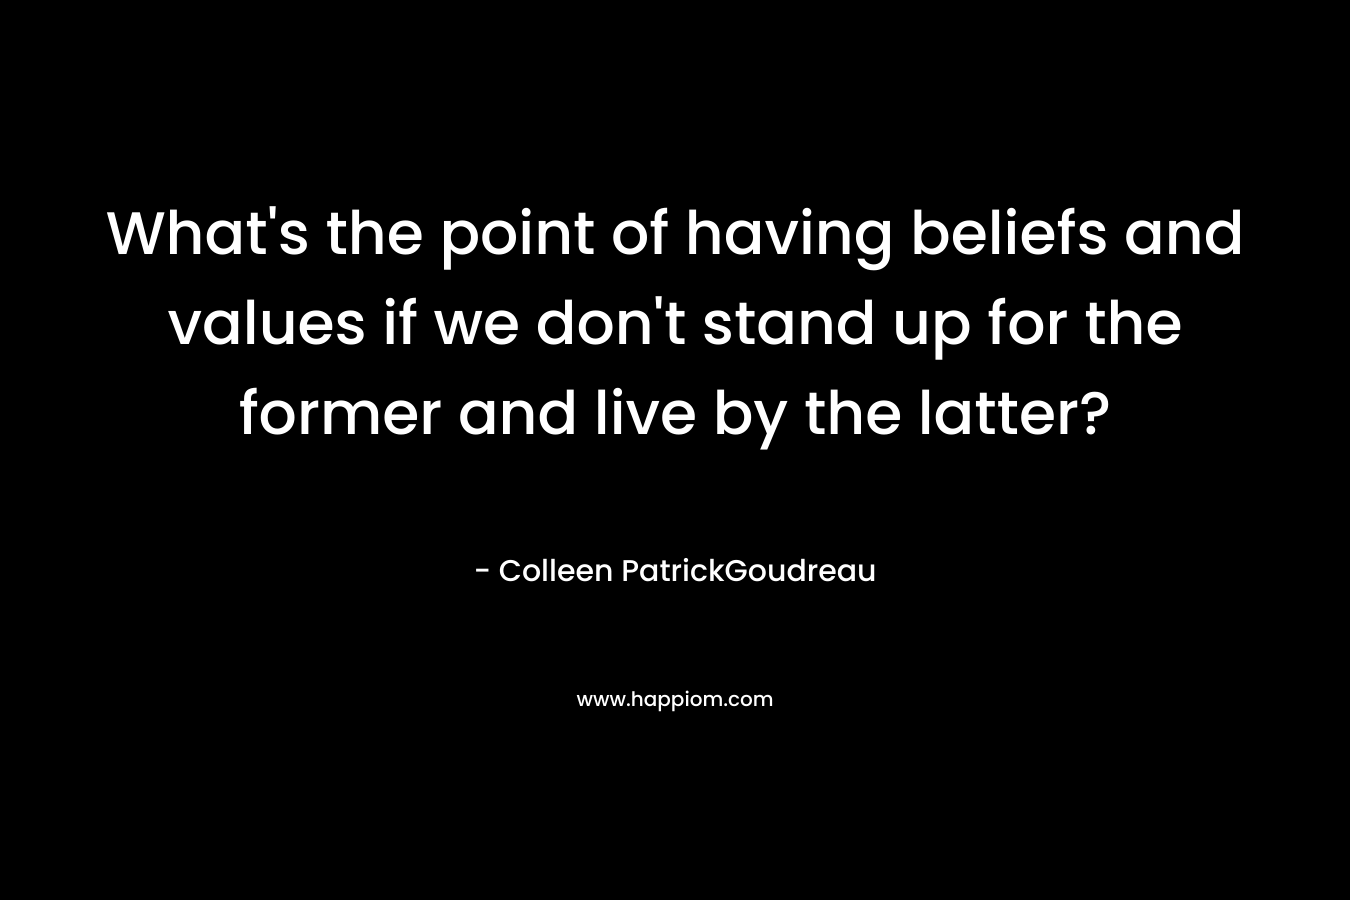 What's the point of having beliefs and values if we don't stand up for the former and live by the latter?